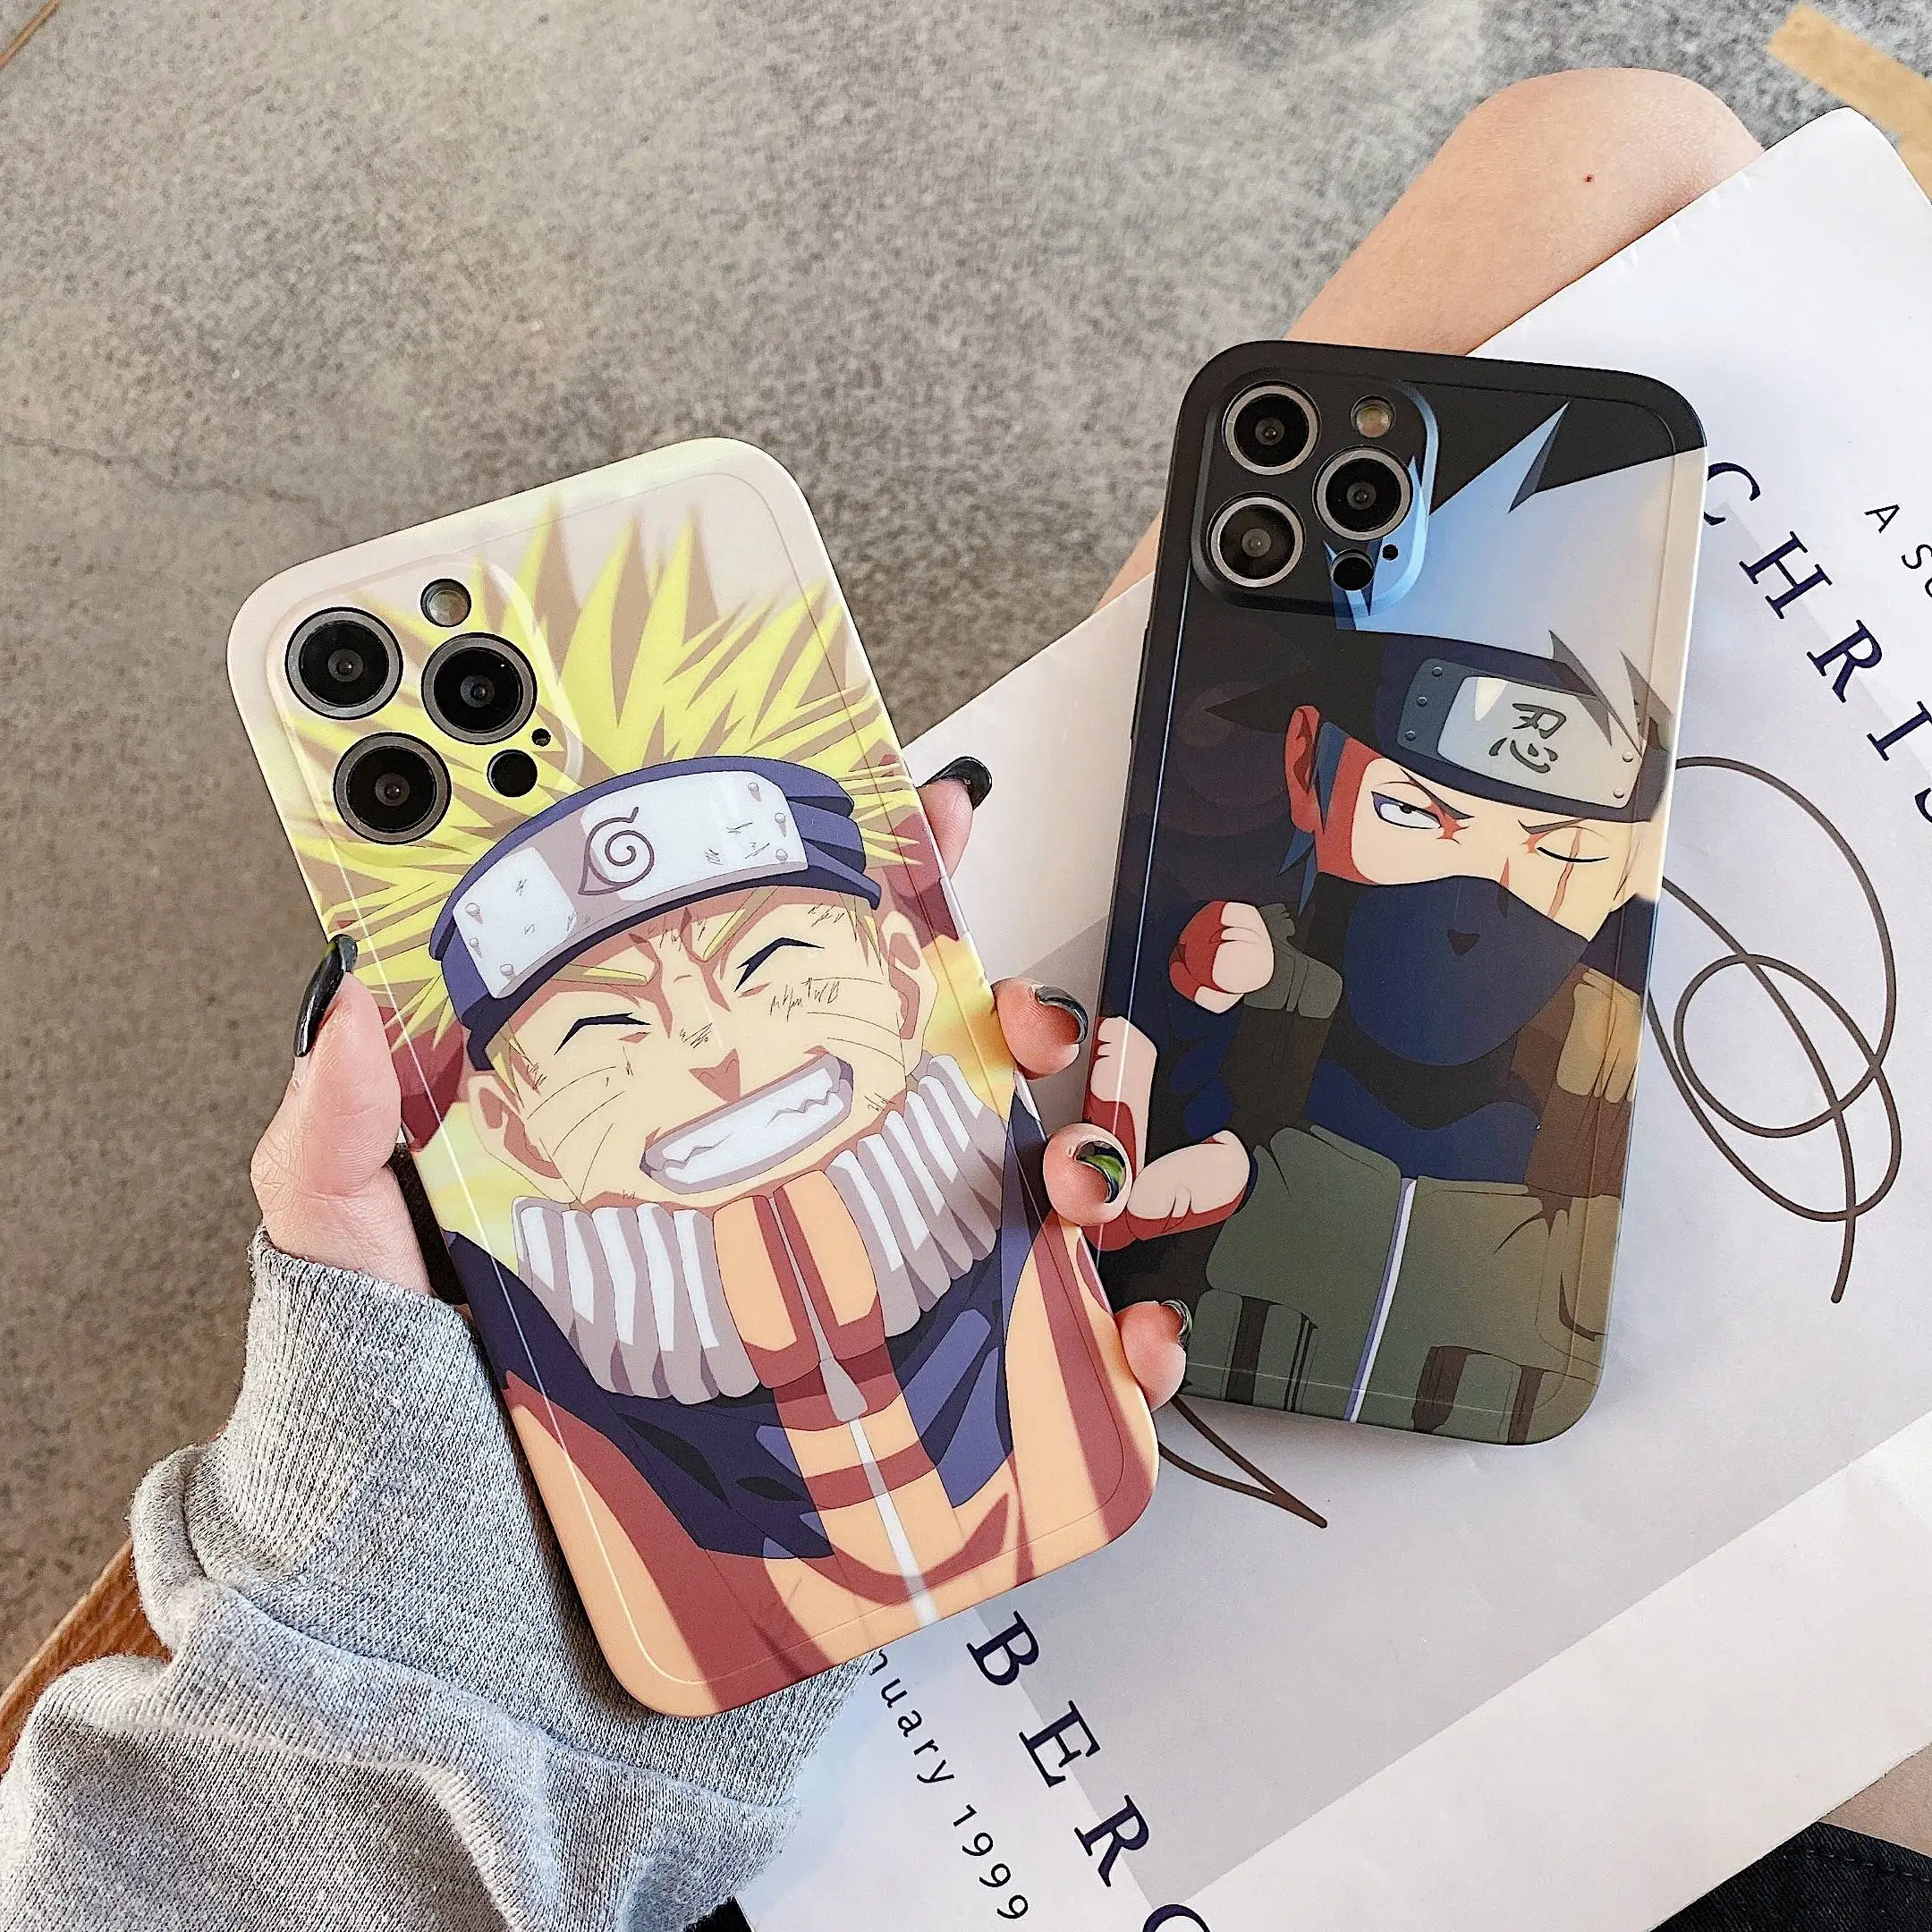 

Kakashi Japanese Cartoon Designs Straight Edge IMD Phone Cover Case For iPhone 11 12 13 Pro Max XR Xs Max 7 8 Plus